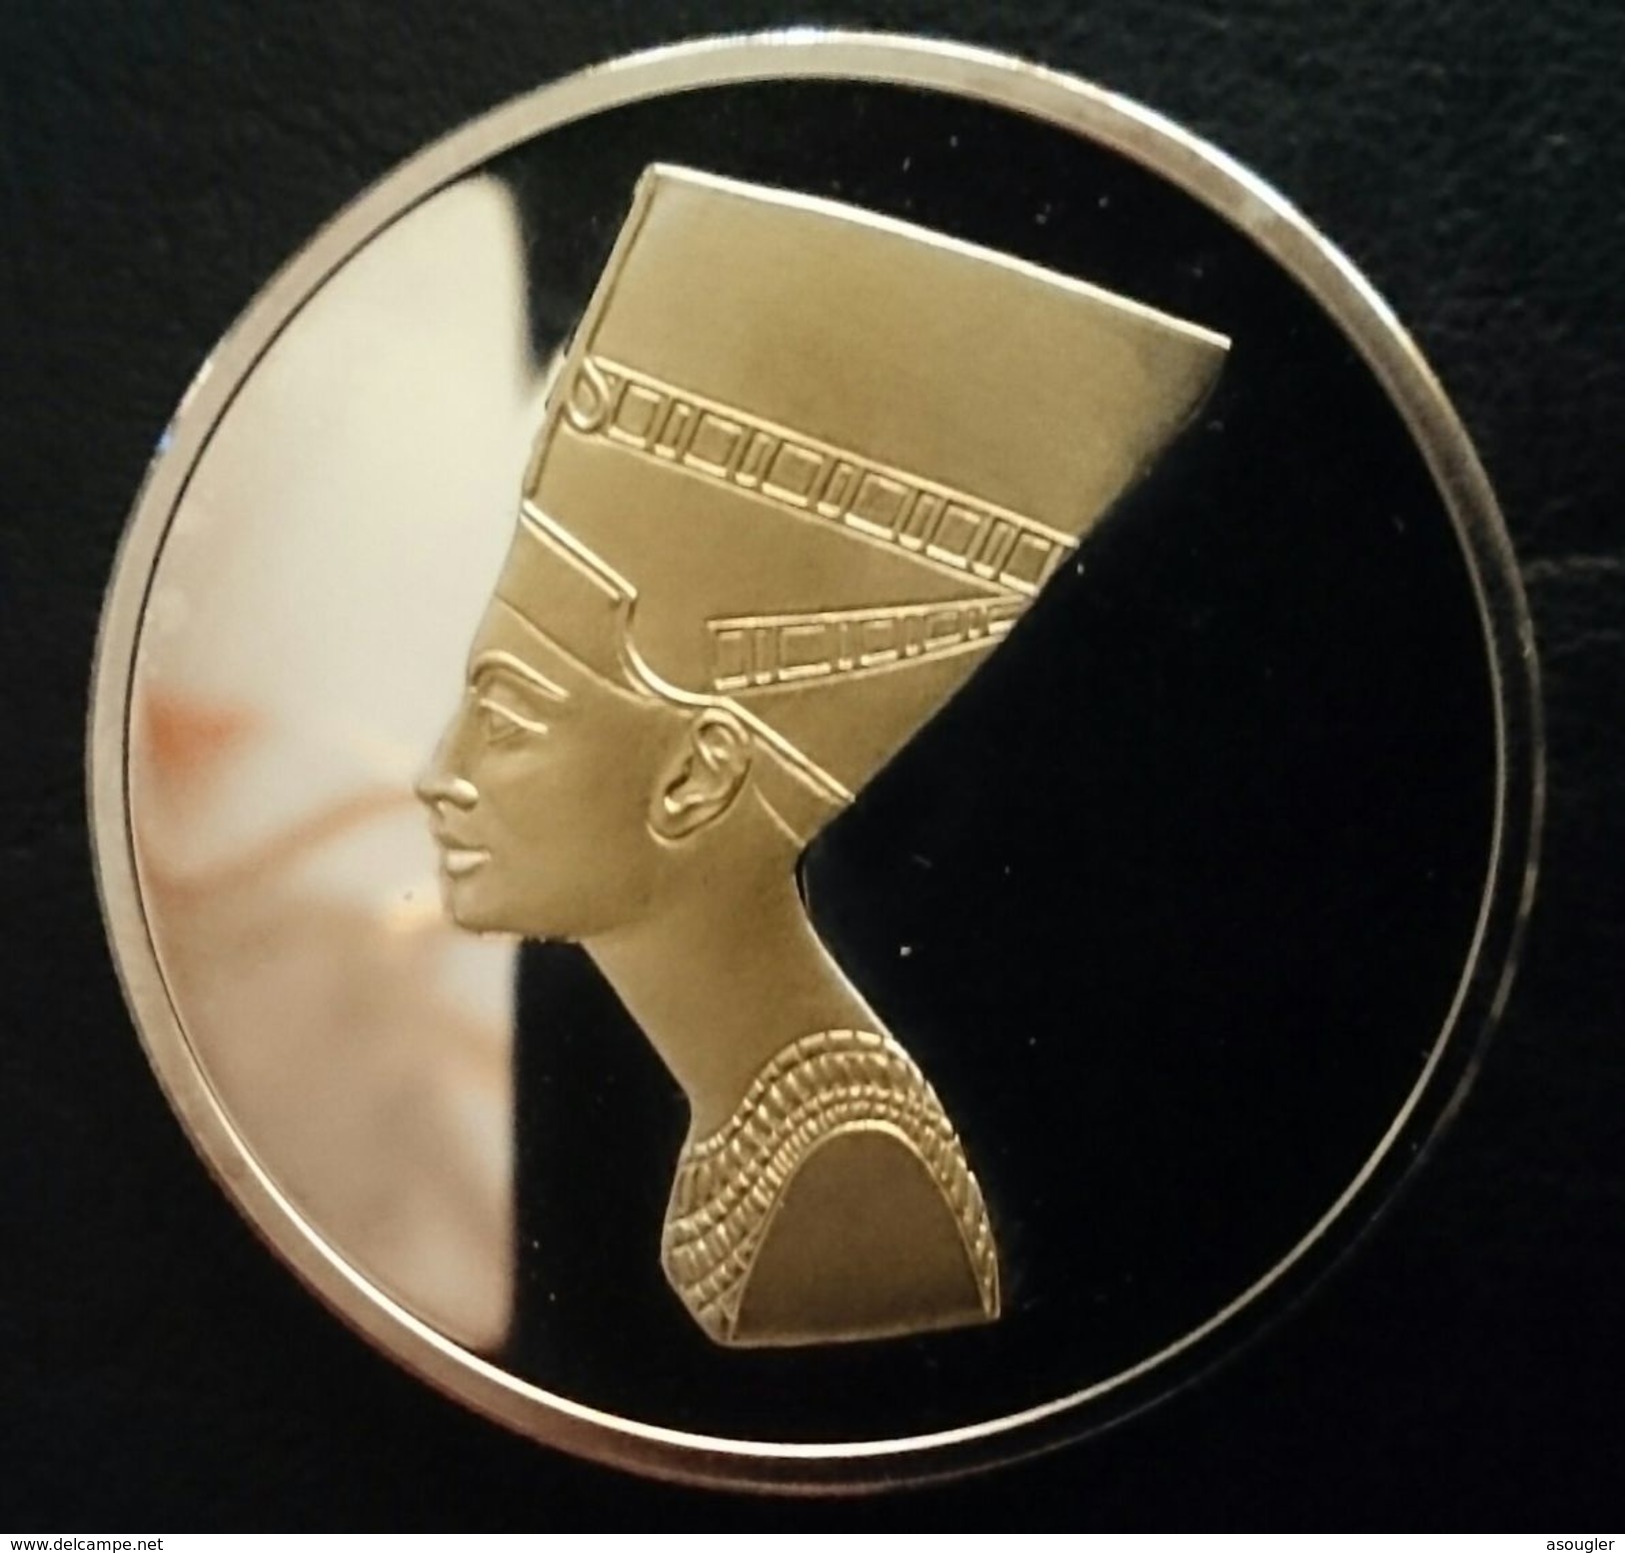 CAMBODIA 3000 Riels 2006 Silver & Gold PROOF "Queen Nefertiti" Free Shipping Via Registered Air Mail - Camboya